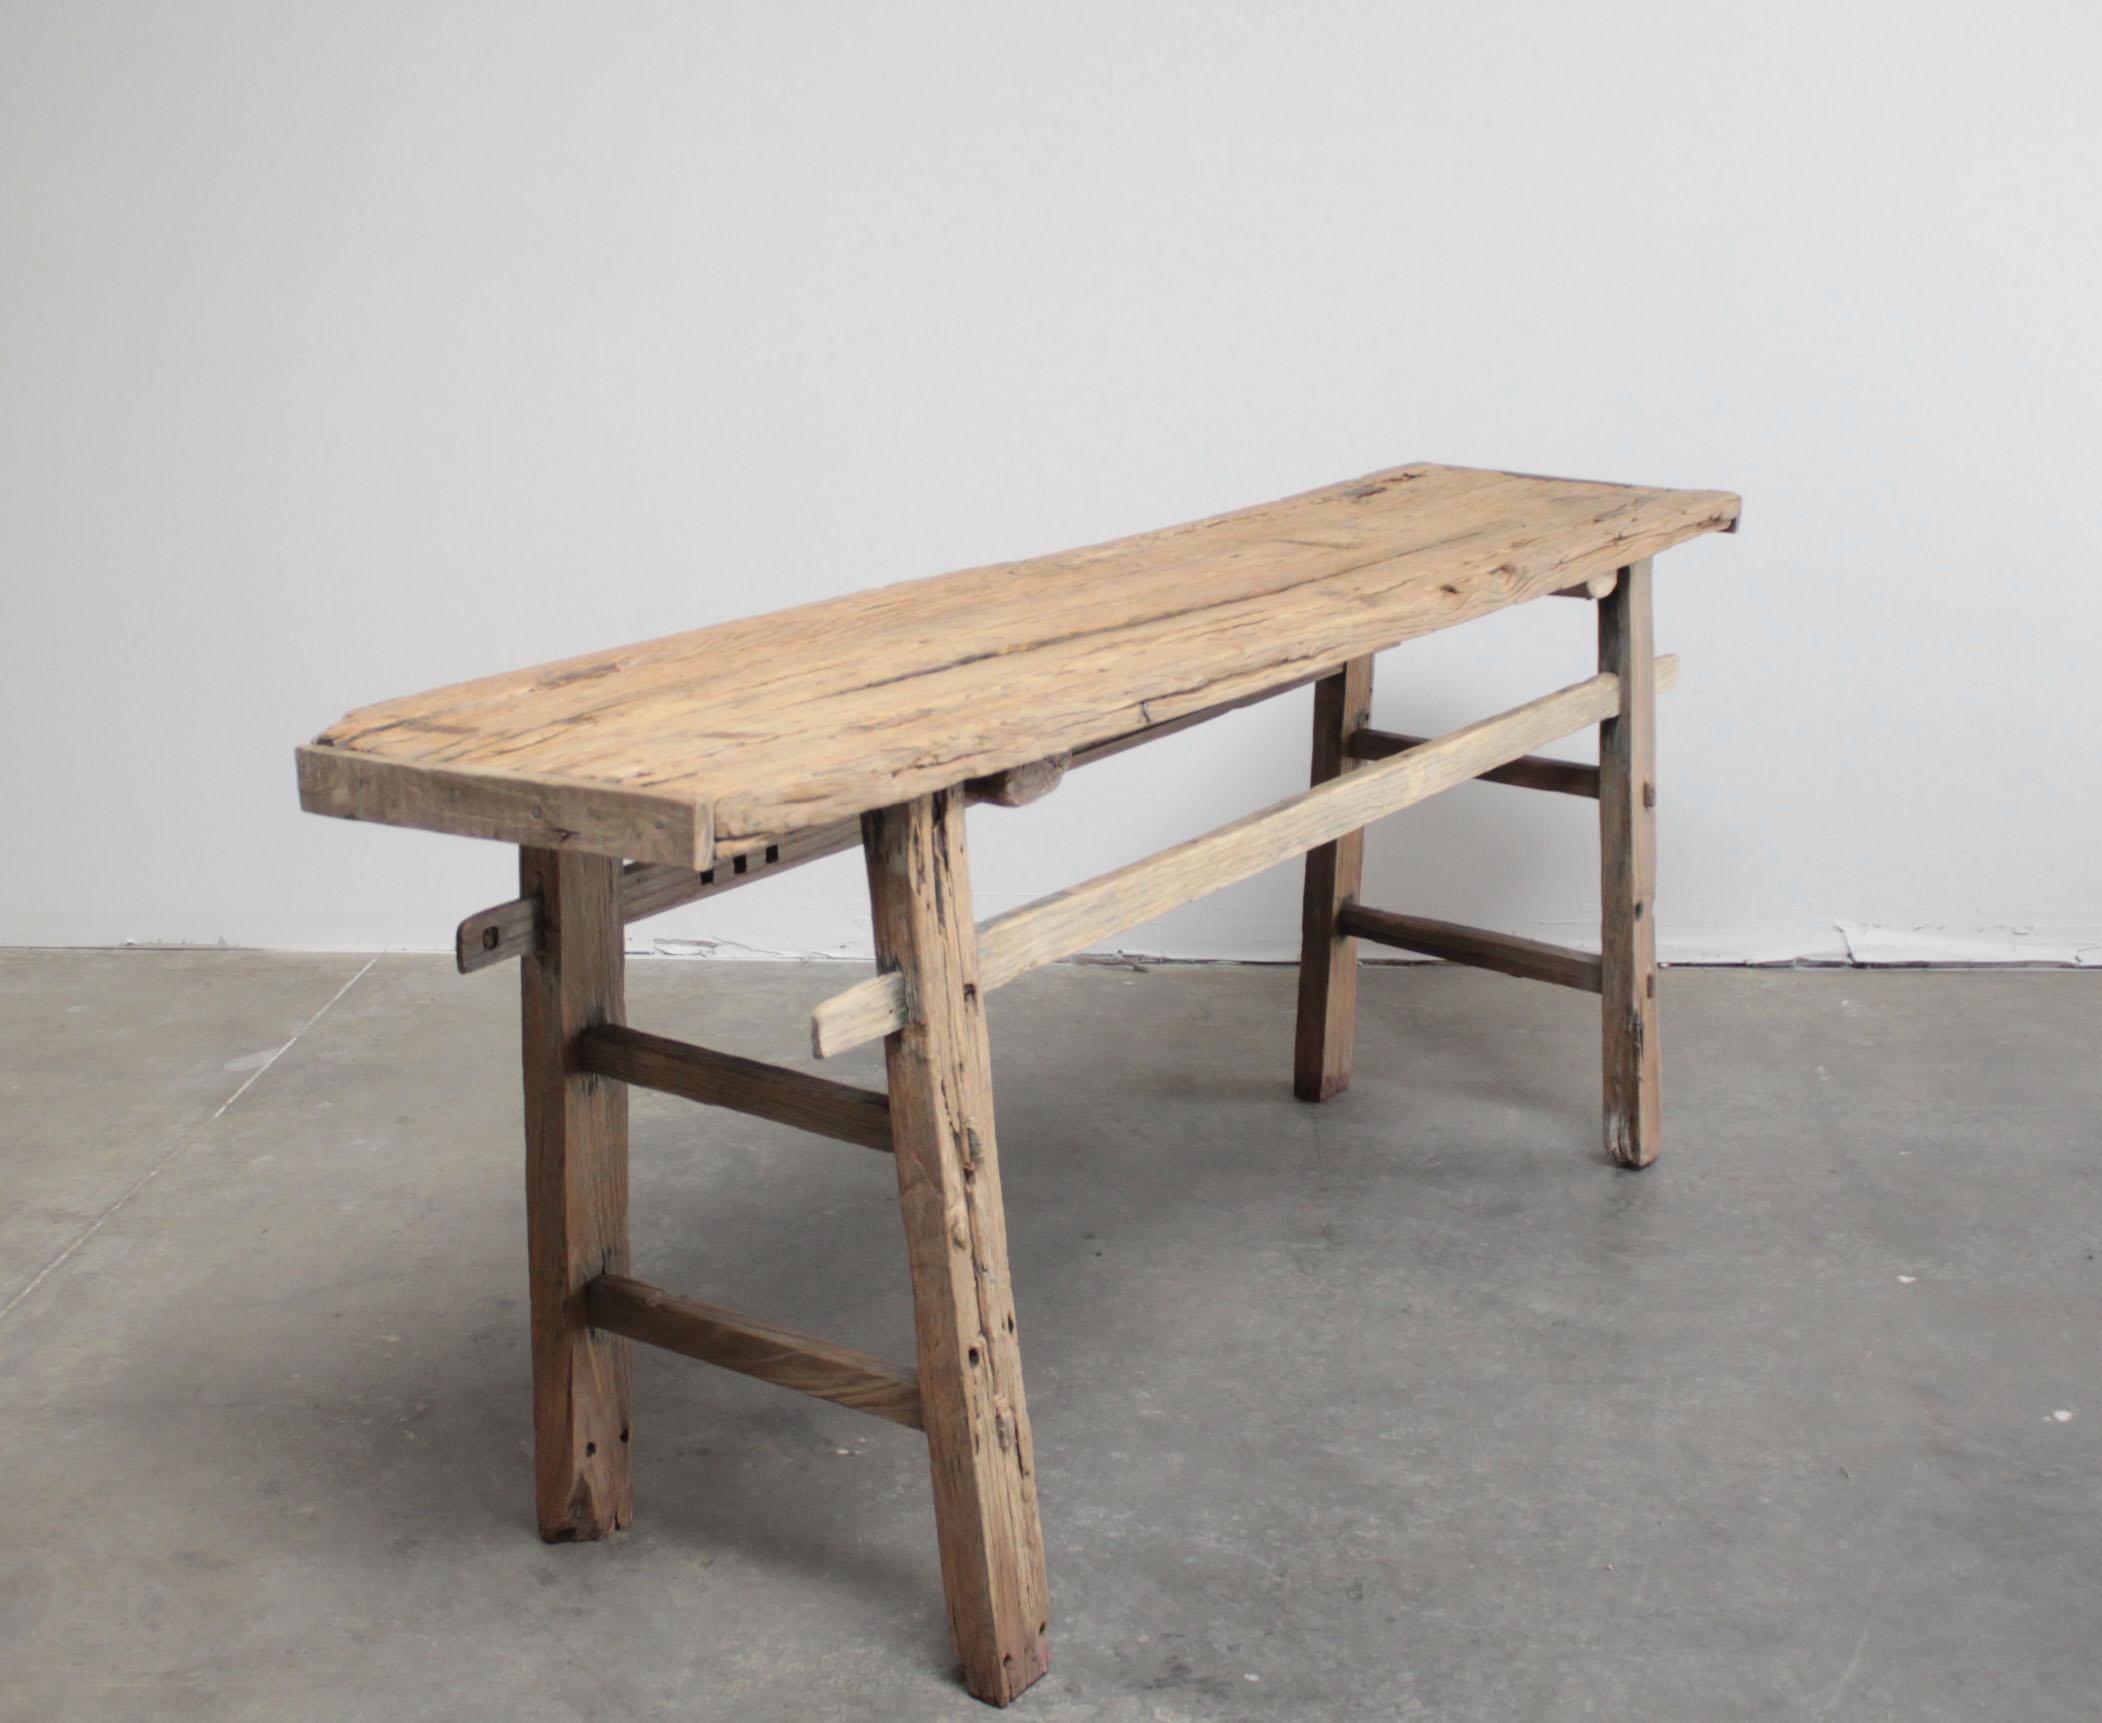 20th century antique vintage rustic elmwood console table
Beautiful natural rustic patina, the console table is solid and sturdy ready for everyday use.
This has a natural raw patina with splits in the top, but this does not affect the stability.